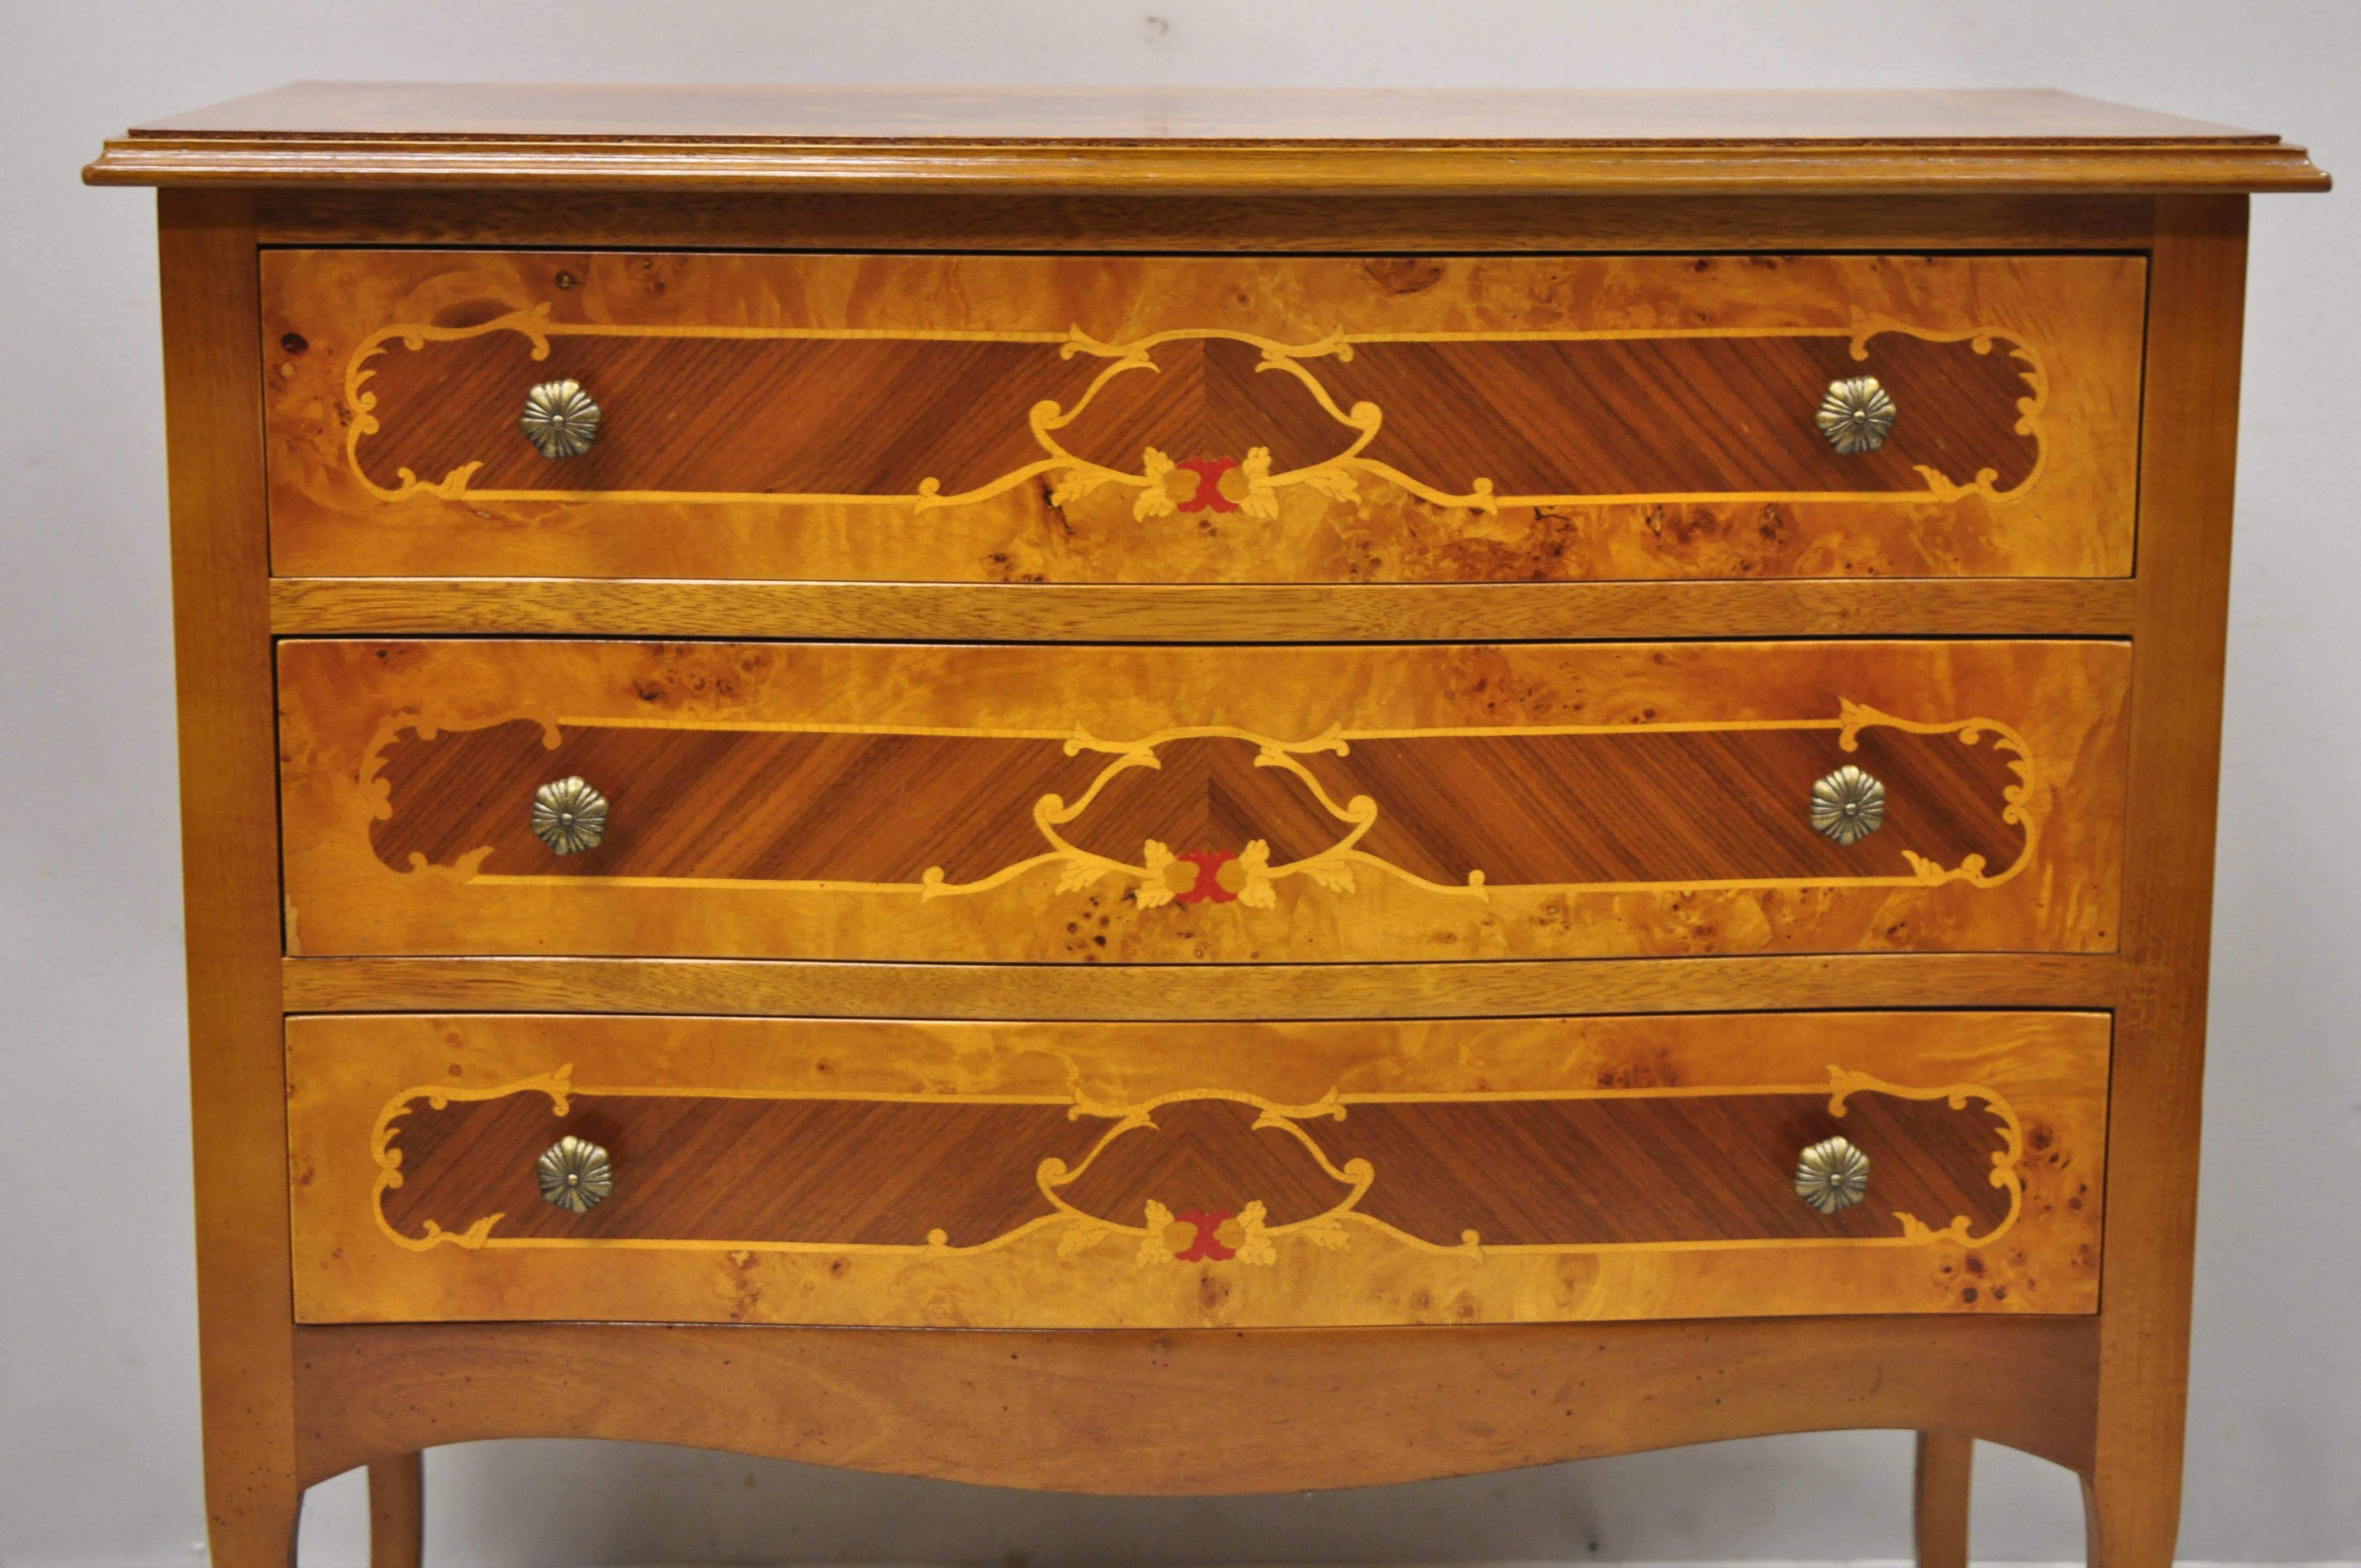 Vintage Italian satinwood inlay 3 drawer chest commode side cabinet. Item features satinwood floral inlay, nice smaller size, beautiful wood grain, cabriole legs, 3 drawers, solid brass hardware, quality Italian craftsmanship, great style and form,